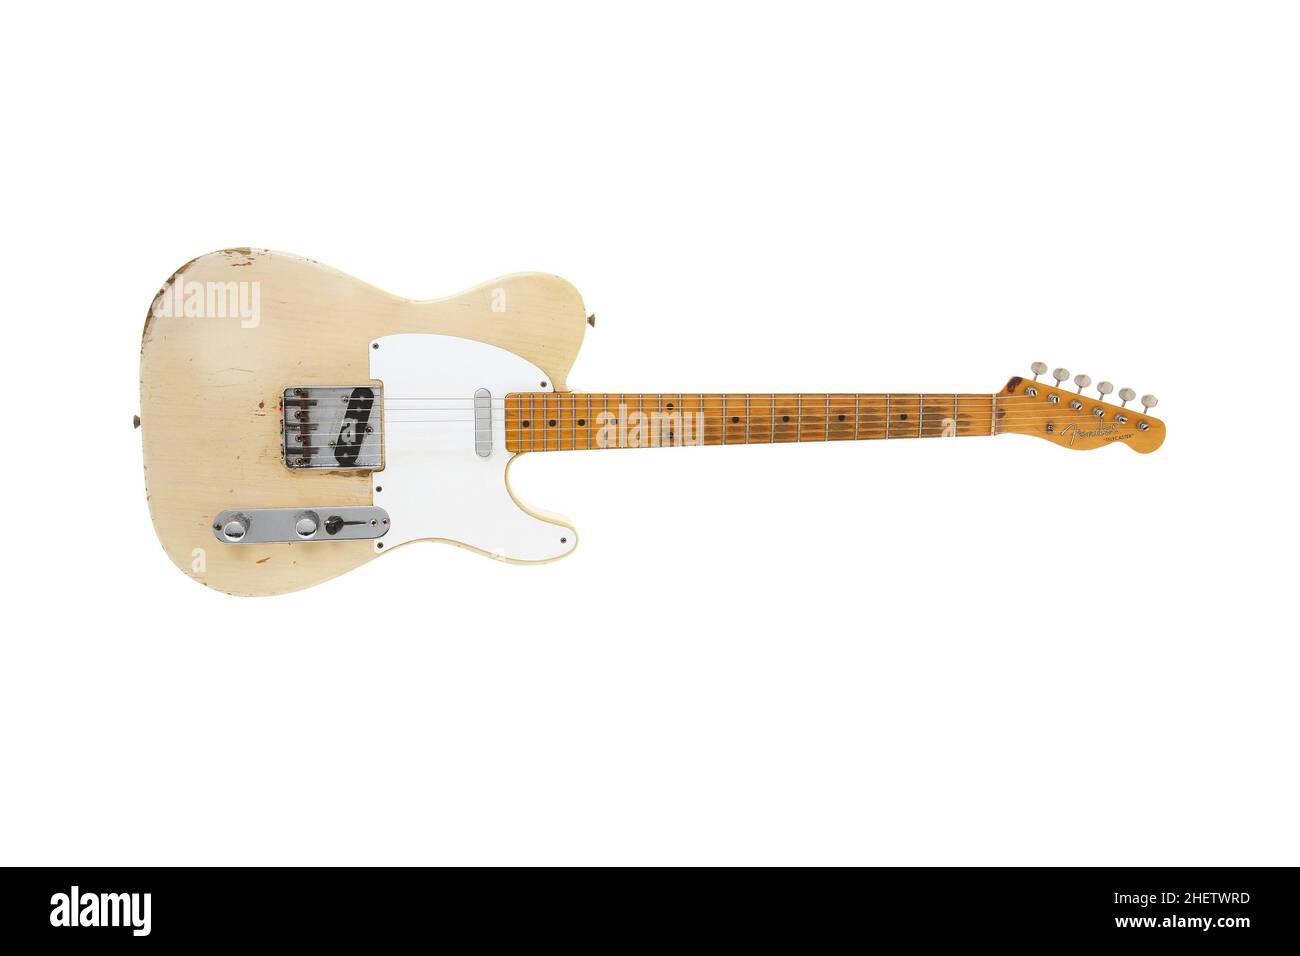 Fender telecaster guitar Cut Out Stock Images & Pictures - Alamy